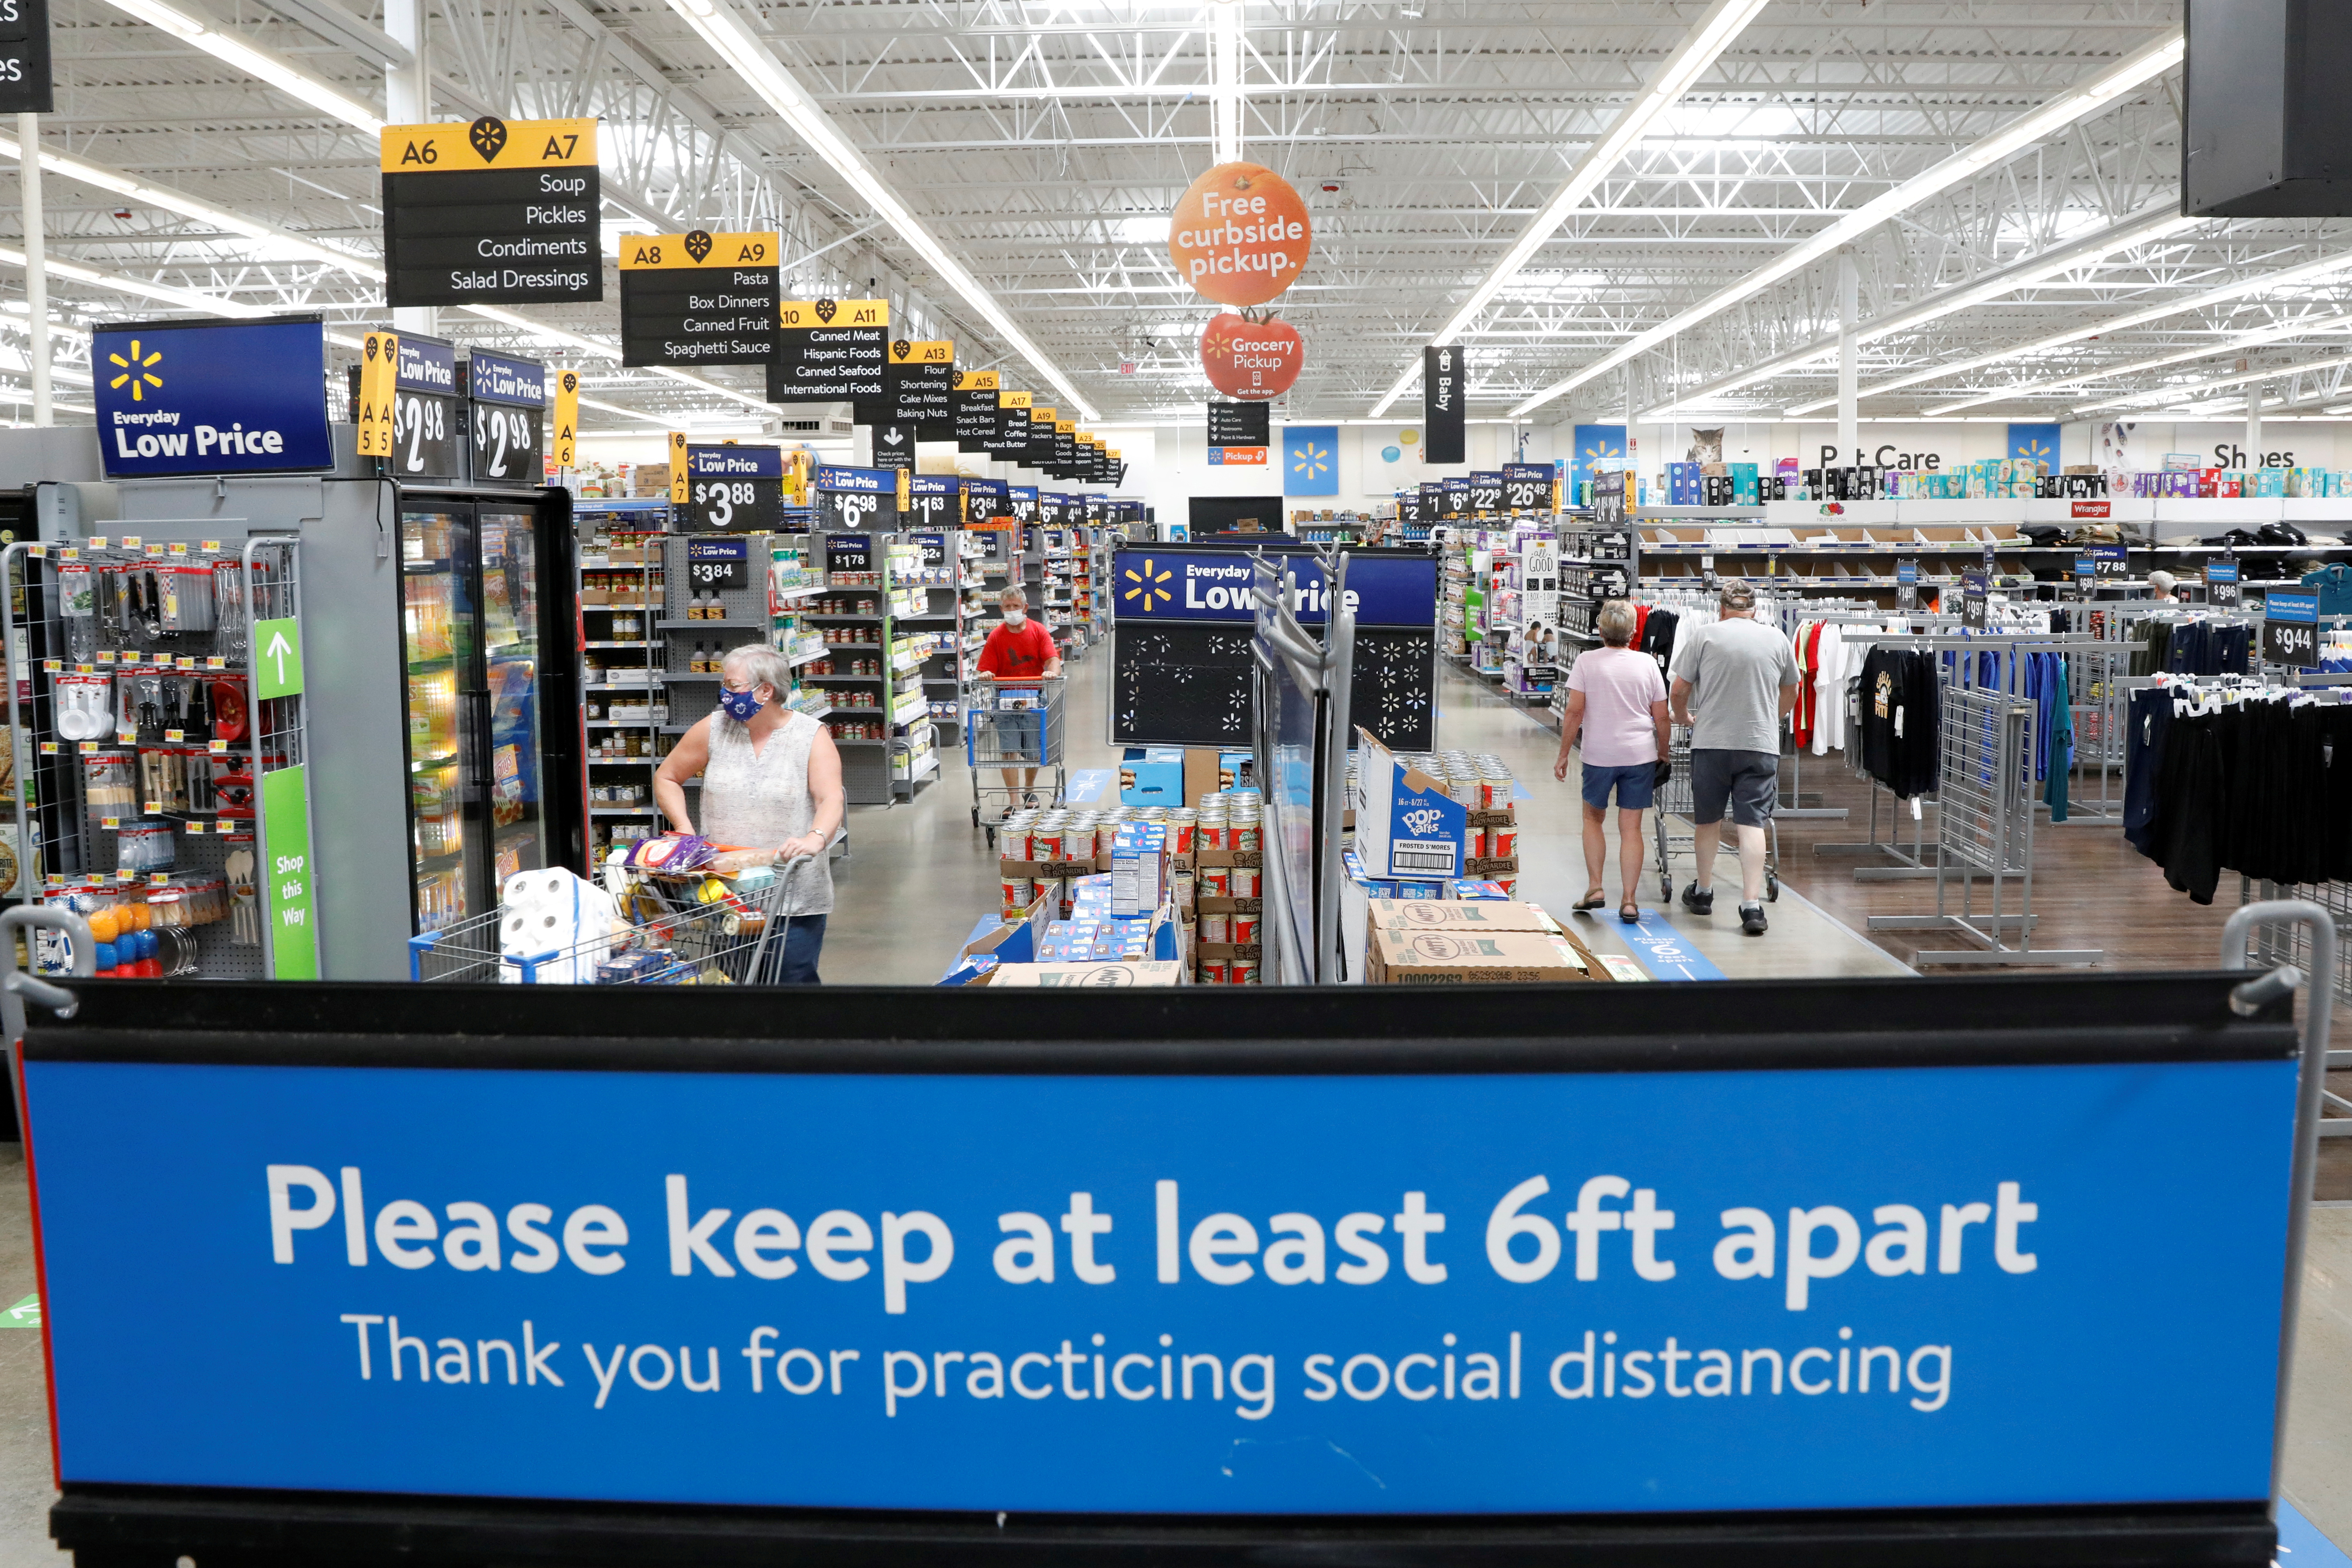 Shoppers are seen wearing masks while shopping at a Walmart store in Bradford, Pennsylvania, U.S. July 20, 2020. REUTERS/Brendan McDermid/File Photo